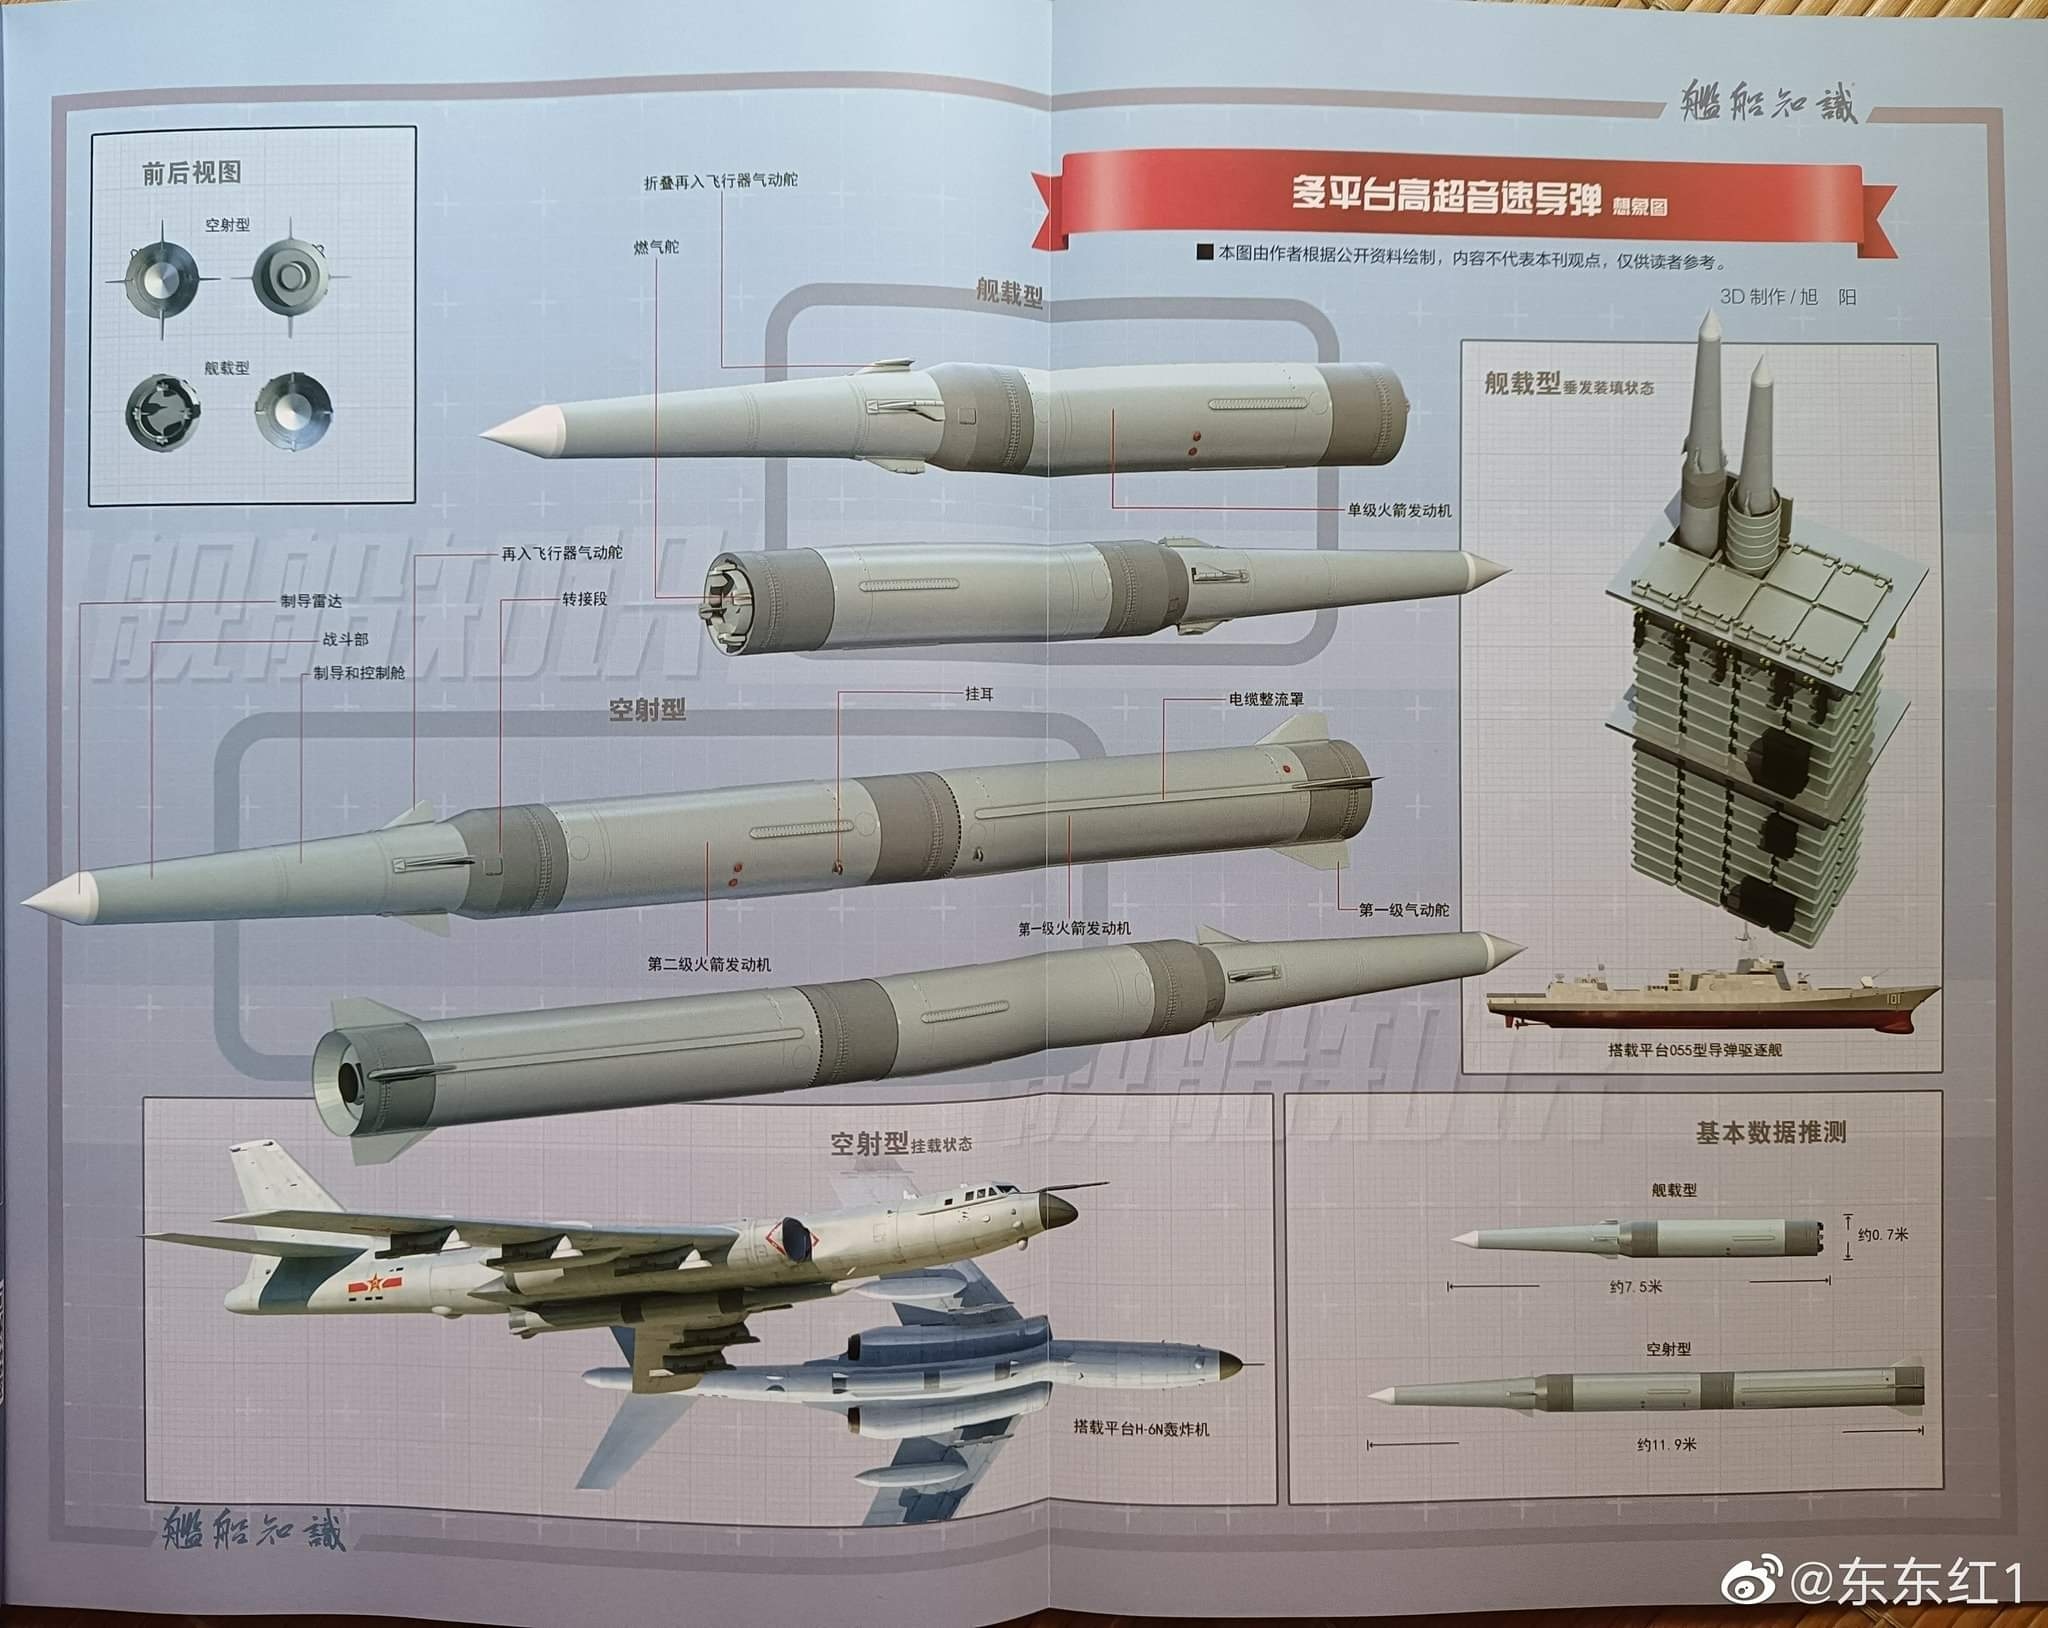 Artist depiction of supposed YJ-21 anti-ship missile. : r/MissilePorn